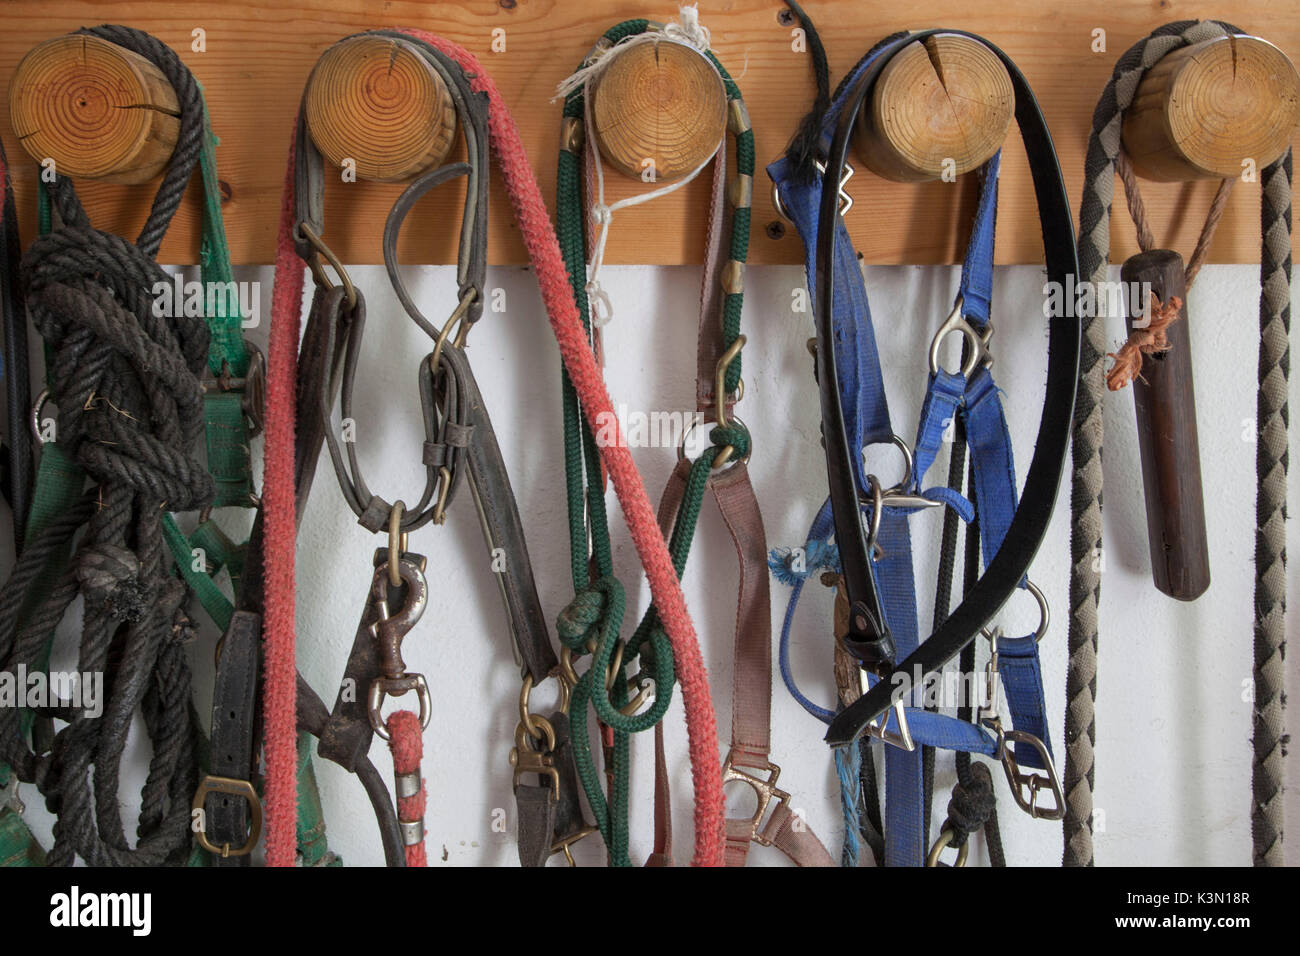 Bridles and halters for horses hung on the wall in the stables of the State Forestry Corp center of Selection Equestrian, Salet, Belluno Dolomites National Park, Monti del Sole Stock Photo